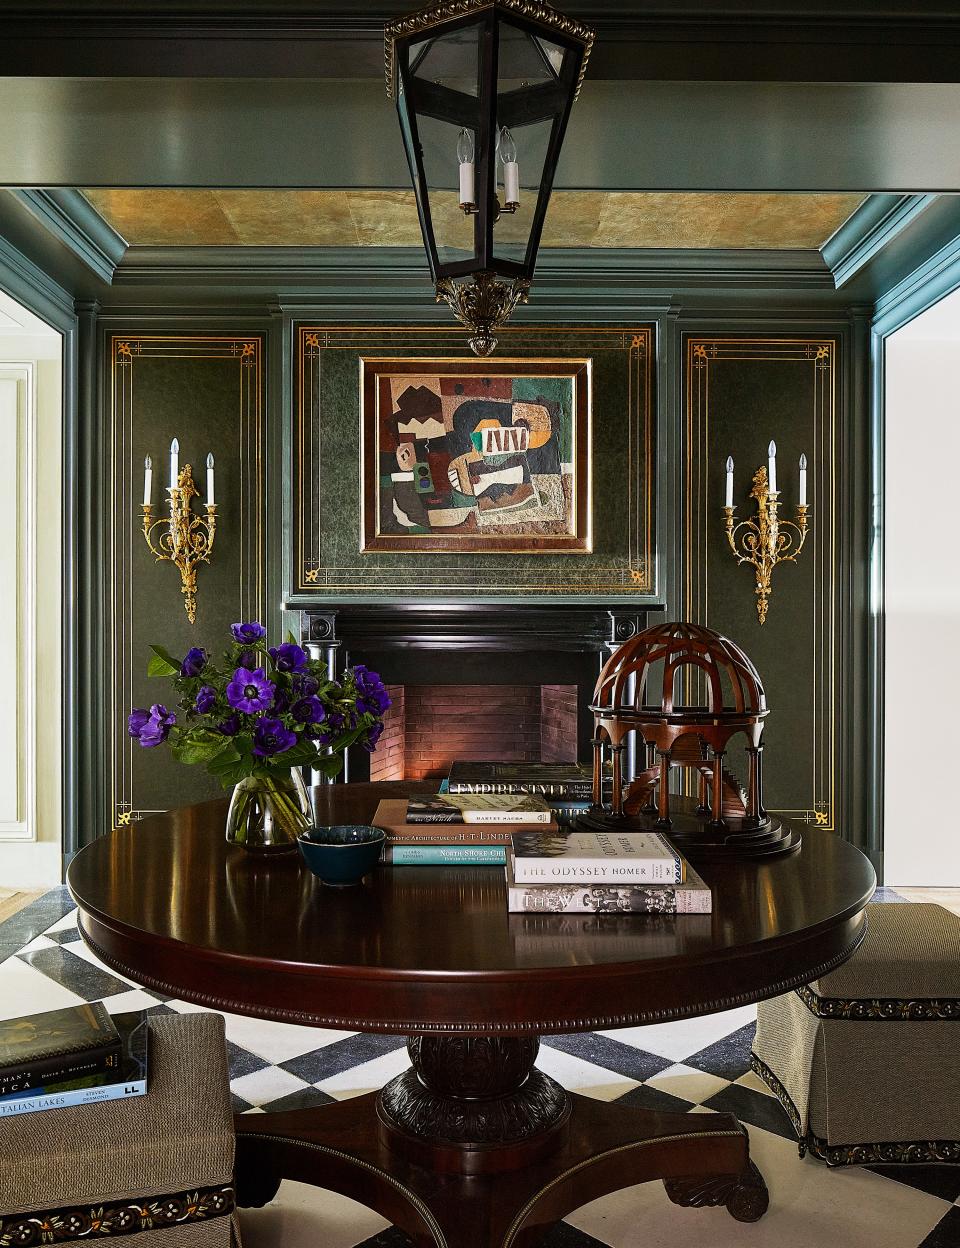 Designed for a family of avid readers, the leather-clad entry—a nod to leather-bound books—with its gilt ceiling and roaring fire provides a warm welcome home to this East Lake Shore Drive apartment in Chicago by Craig & Company. The leather walls were made by Michele Costello of CSI Designs.